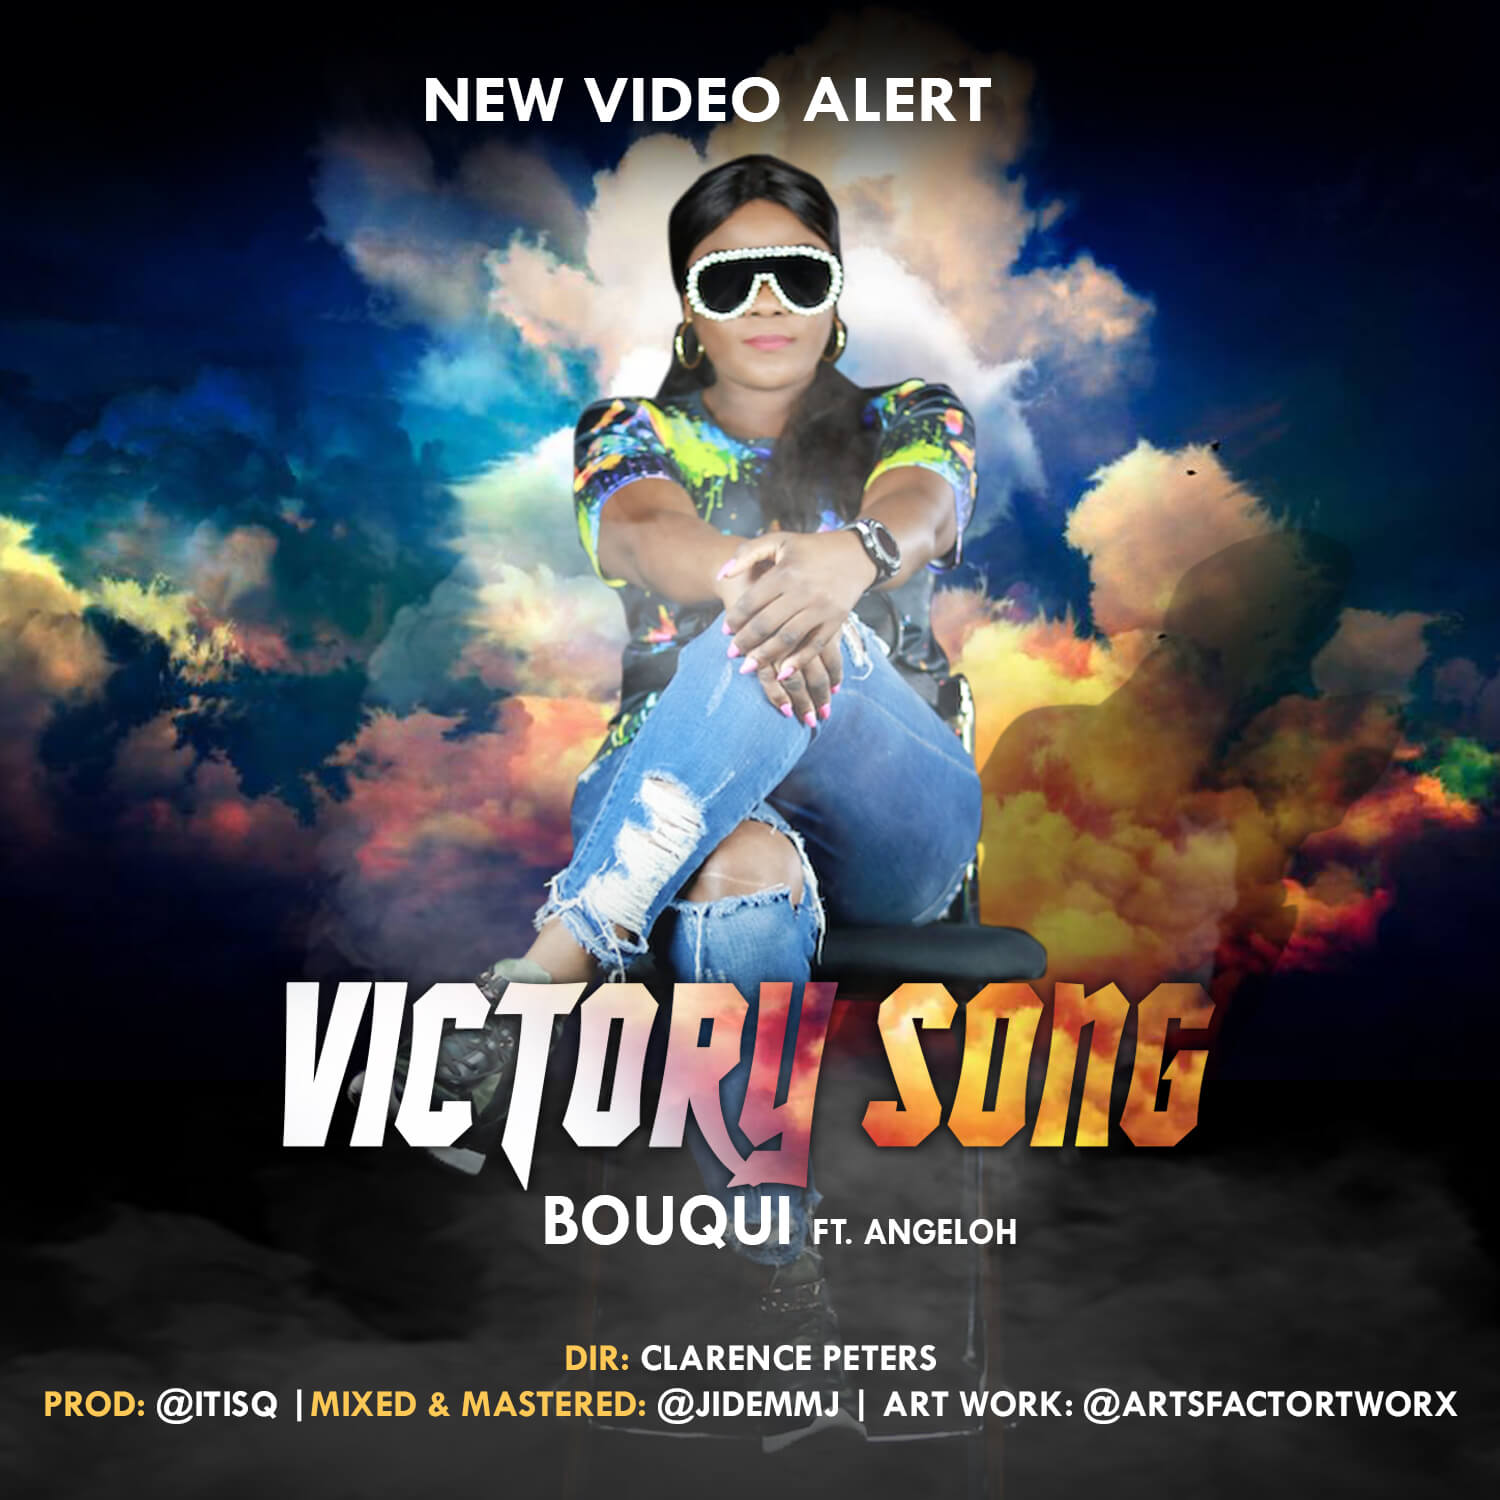 VIDEO: Bouqui - Victory Song ft. Angeloh